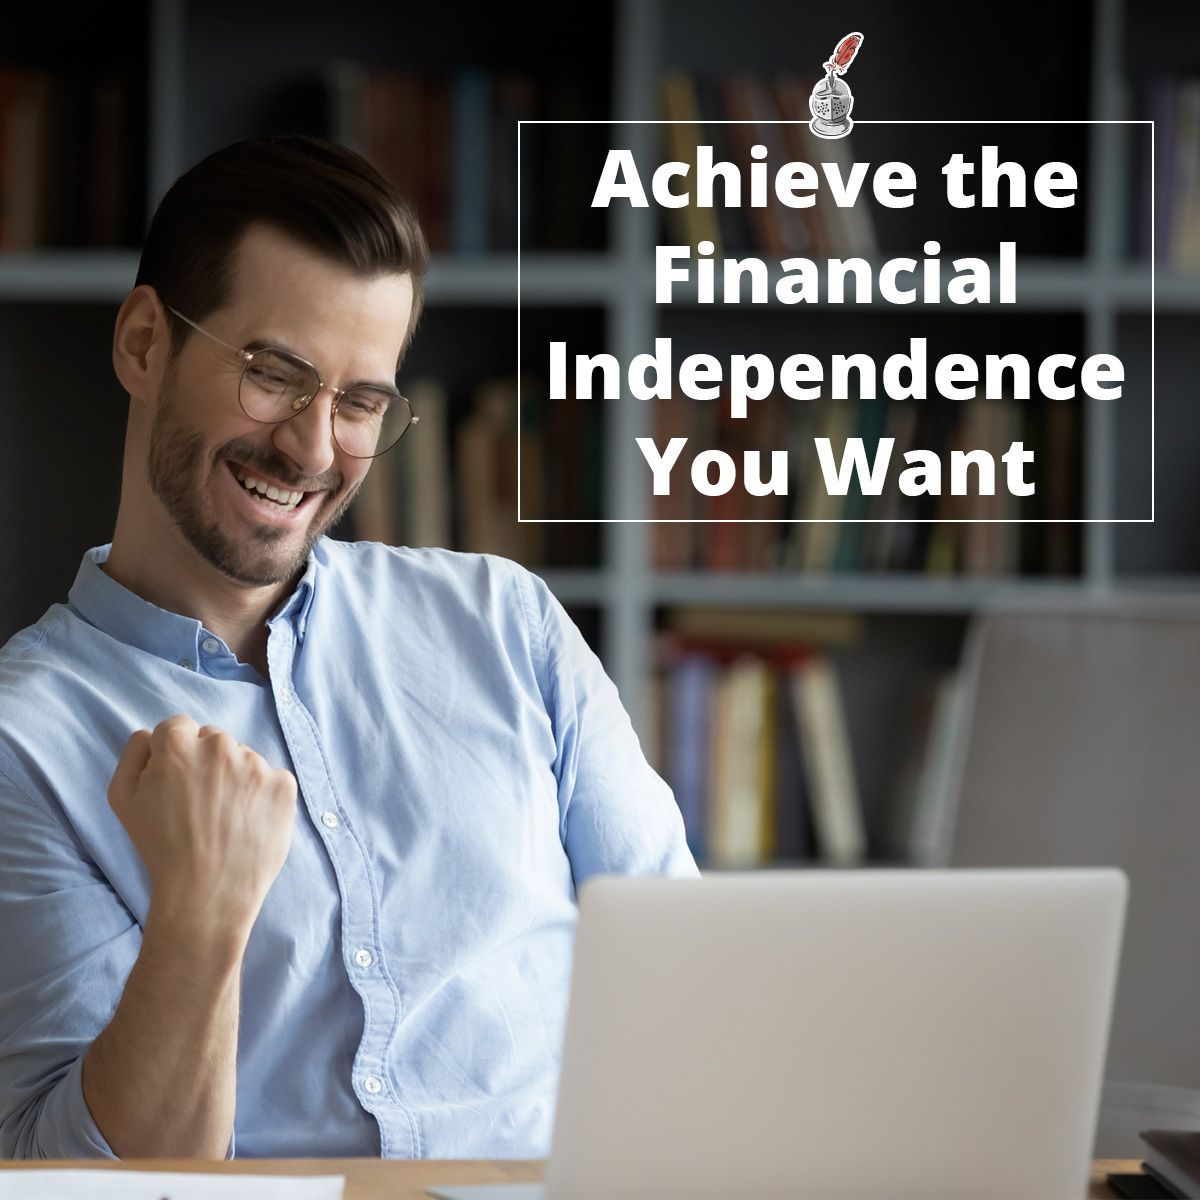 Achieve the Financial Independence You Want